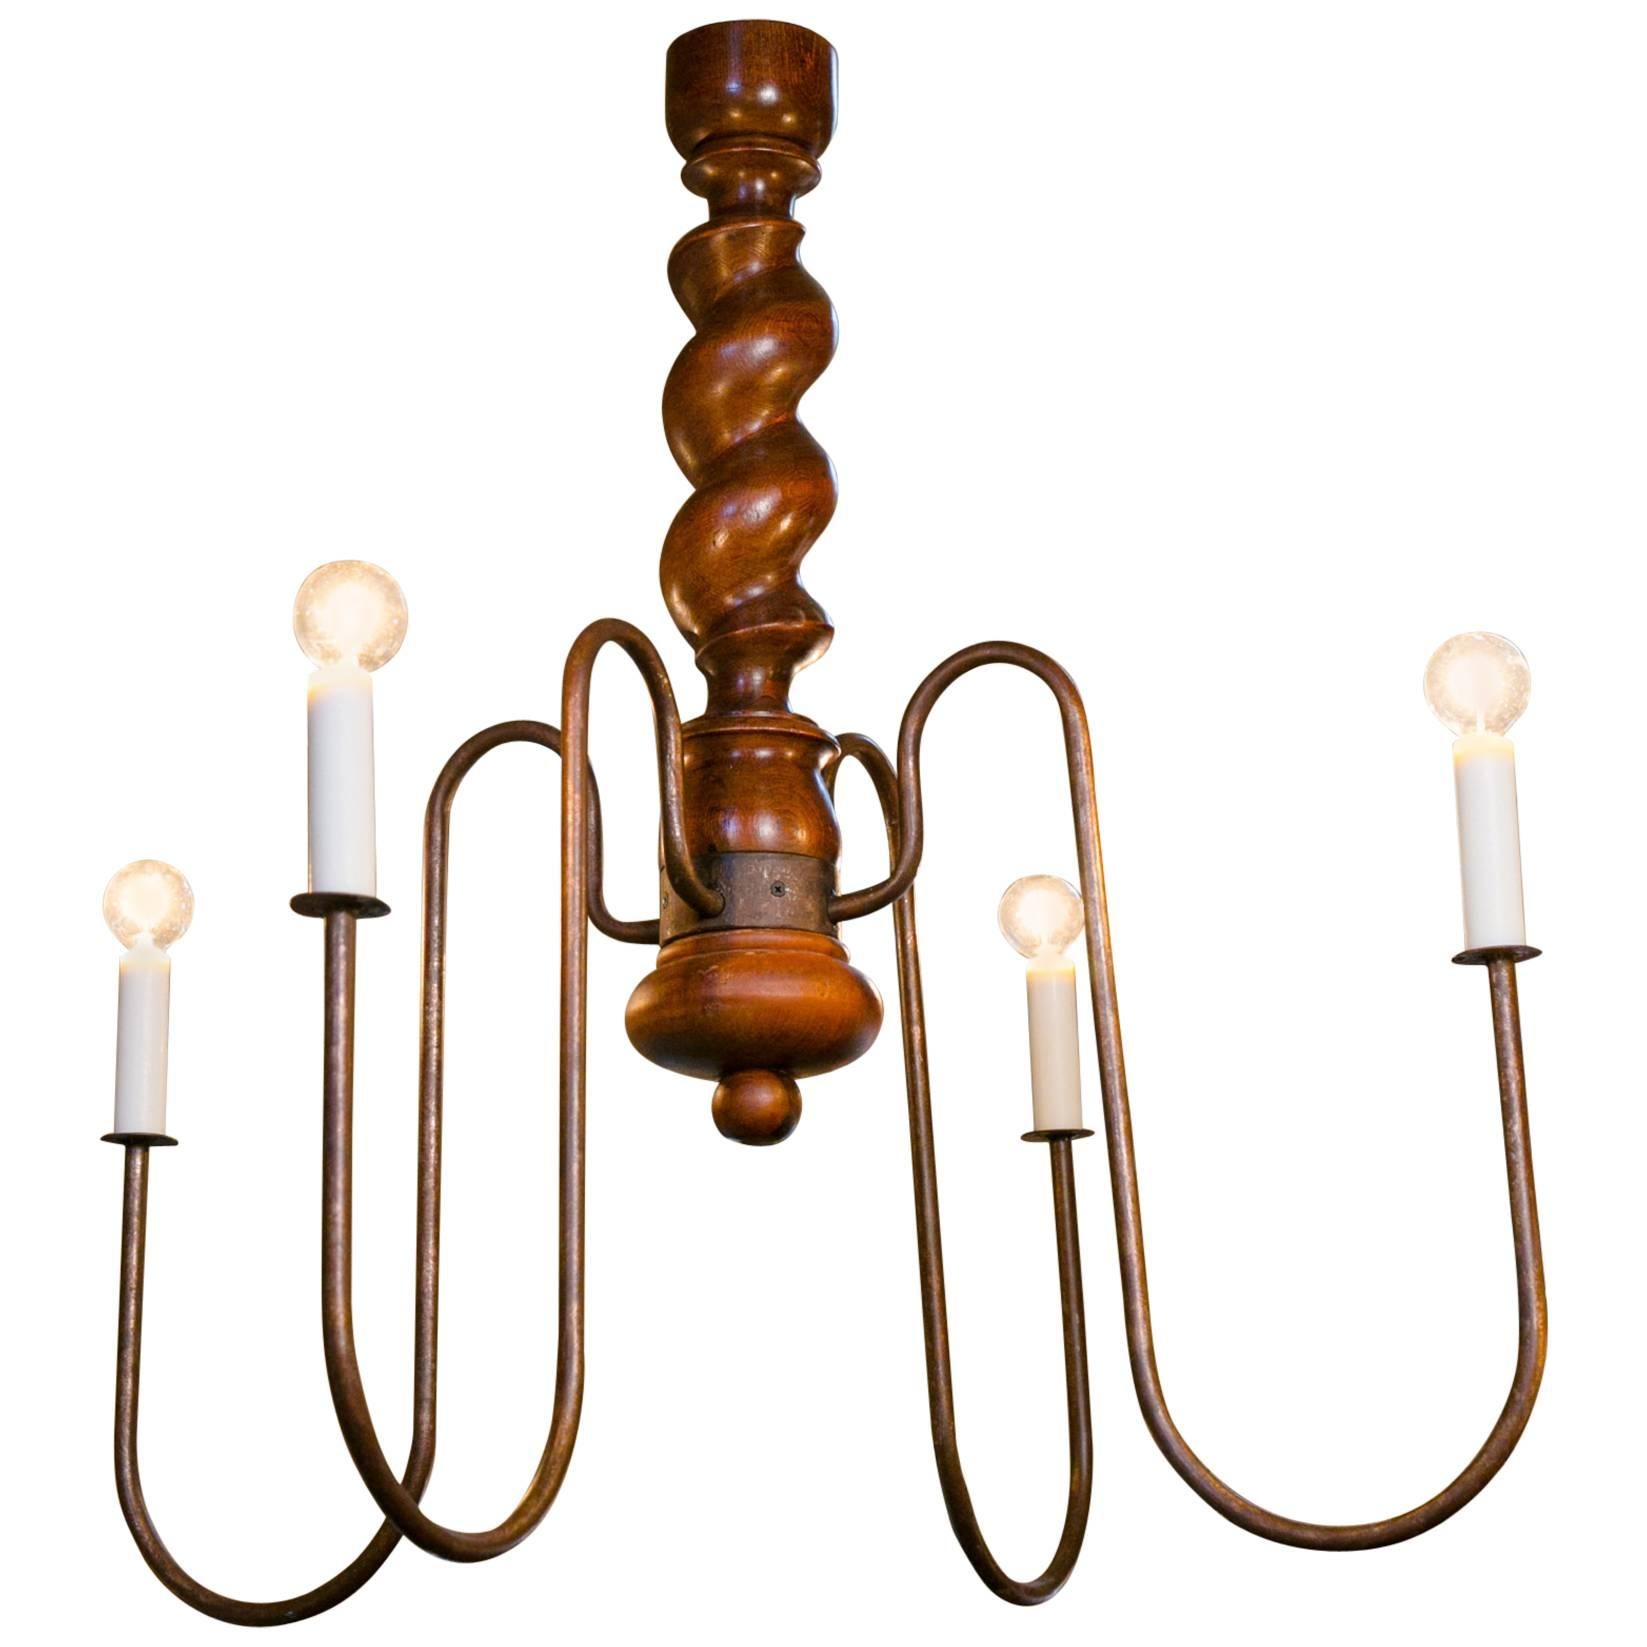 One of a Kind Barley Twist Wood and Iron Four-Arm Chandelier